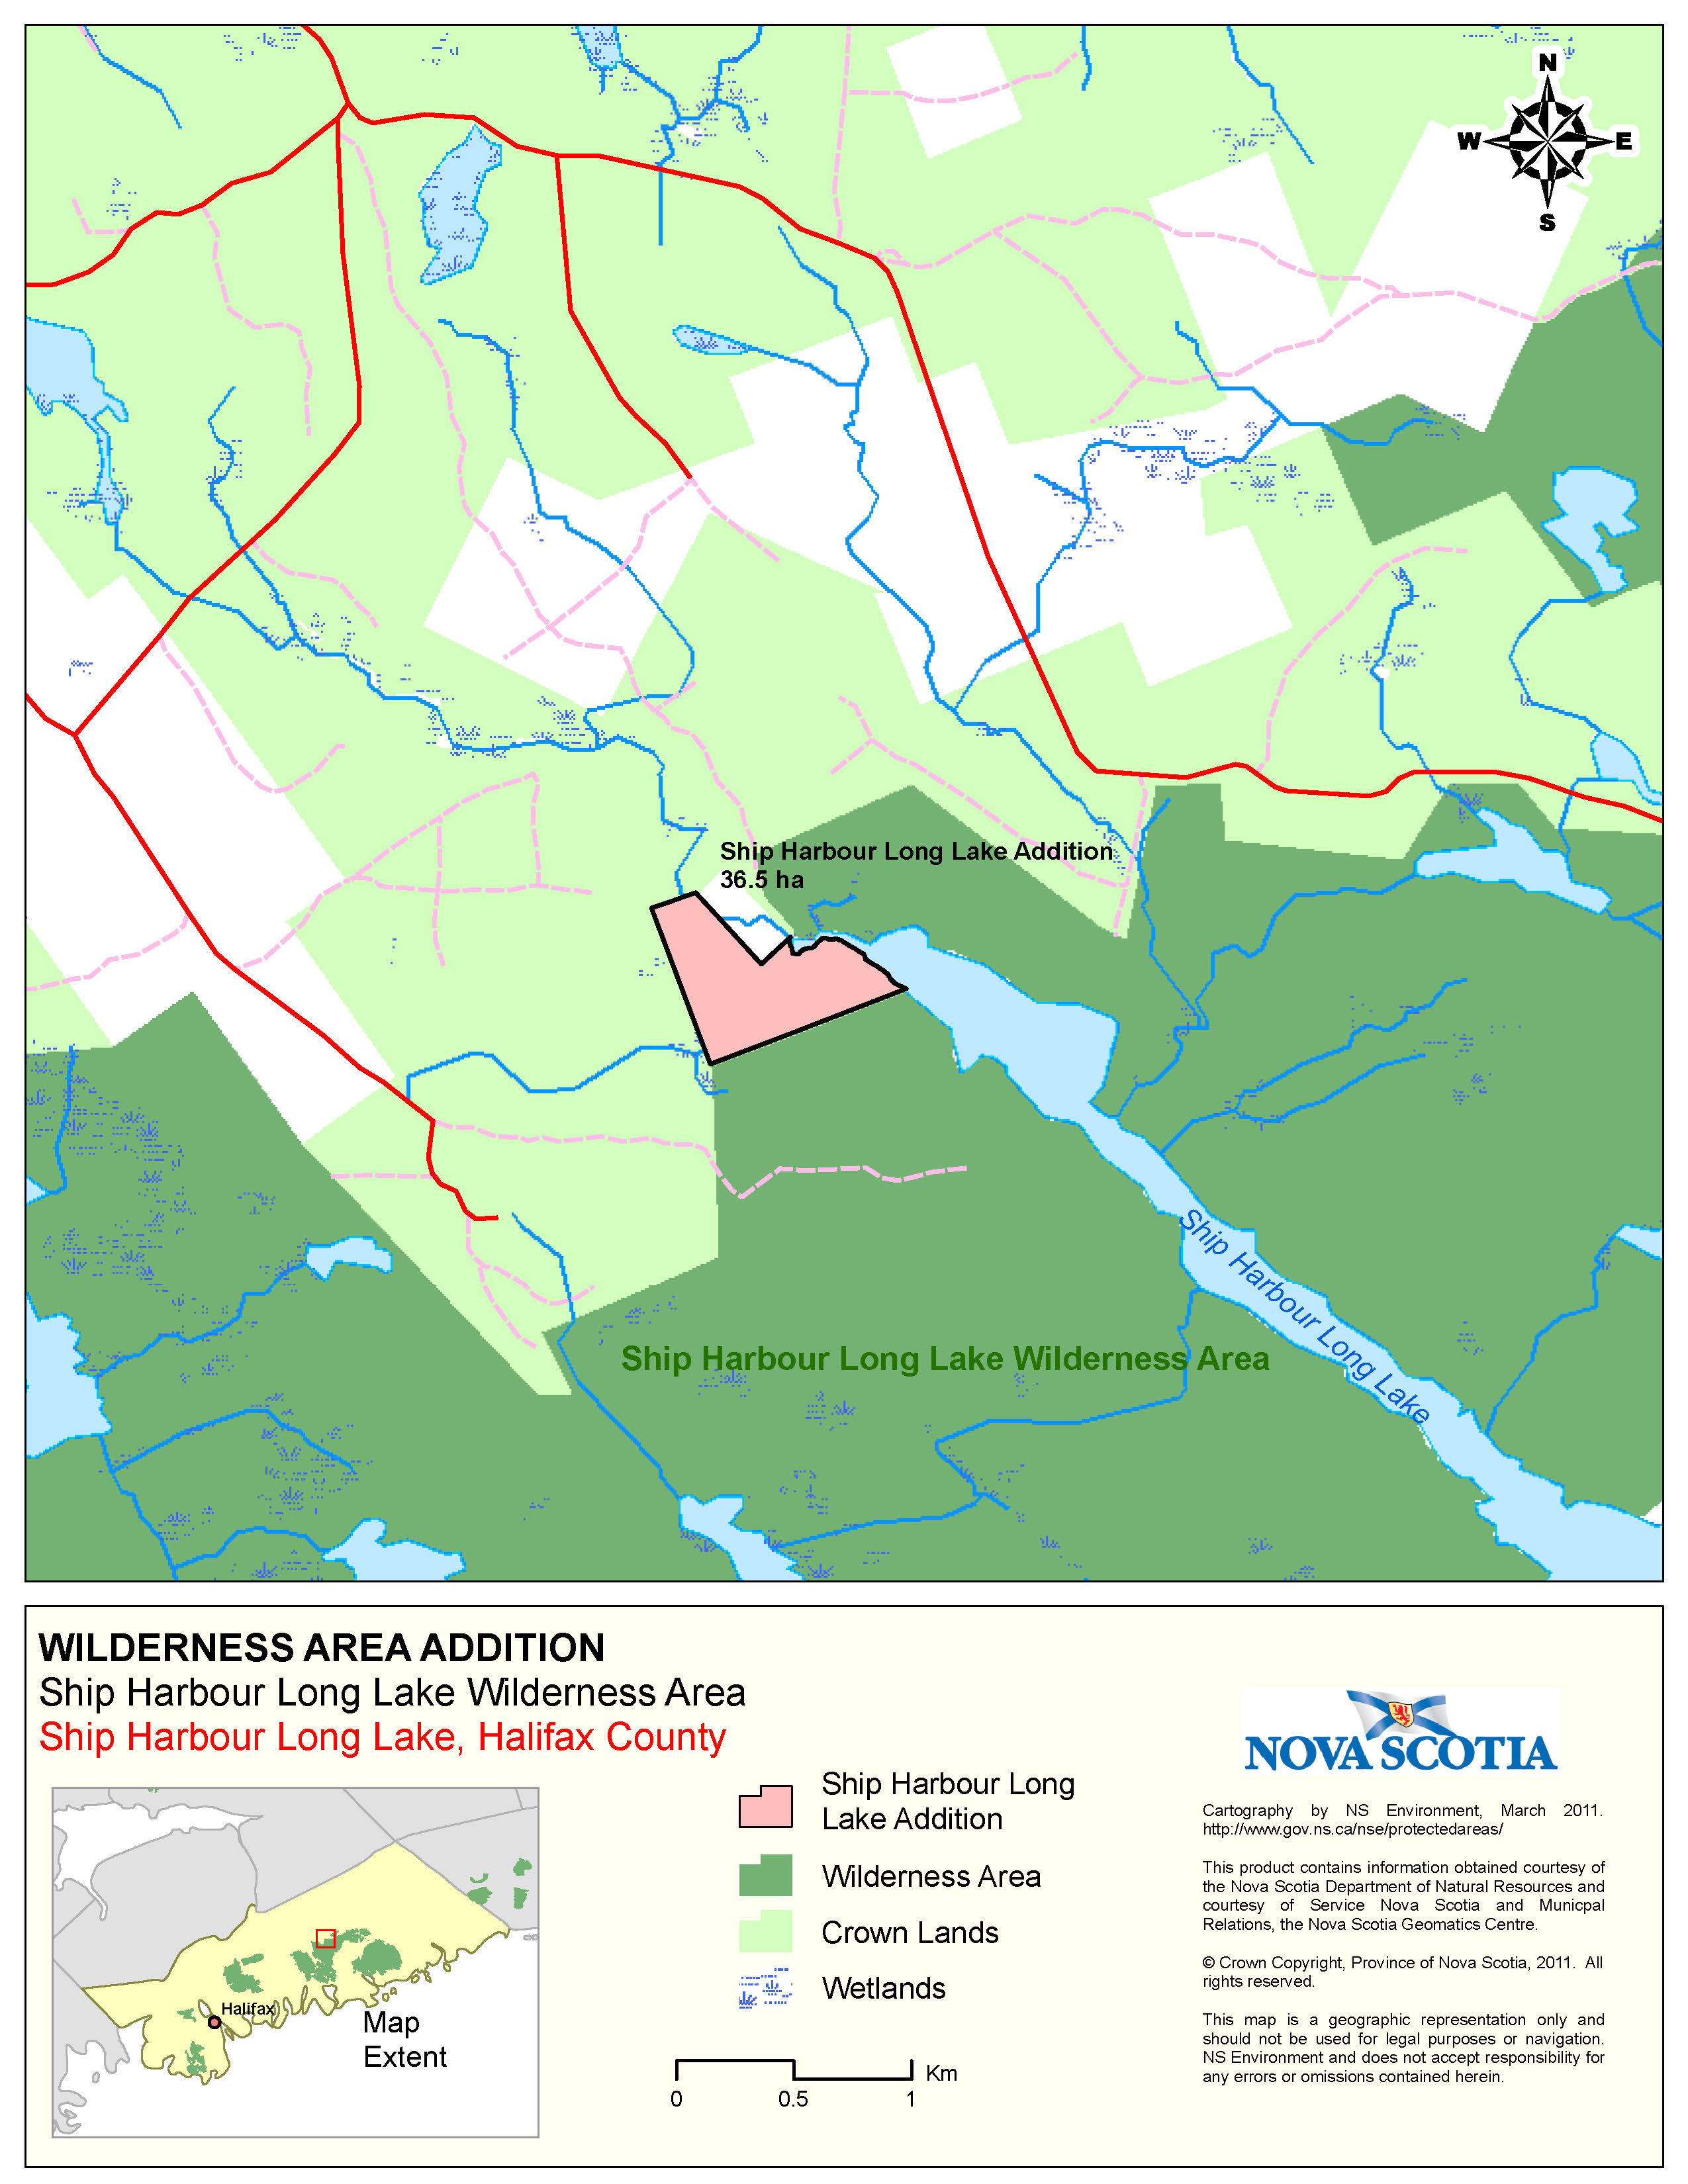 Graphic showing map of Boundaries of Crown Land at  Ship Harbour Long Lake, Halifax County Addition to Ship Harbour Long Lake Wilderness Area